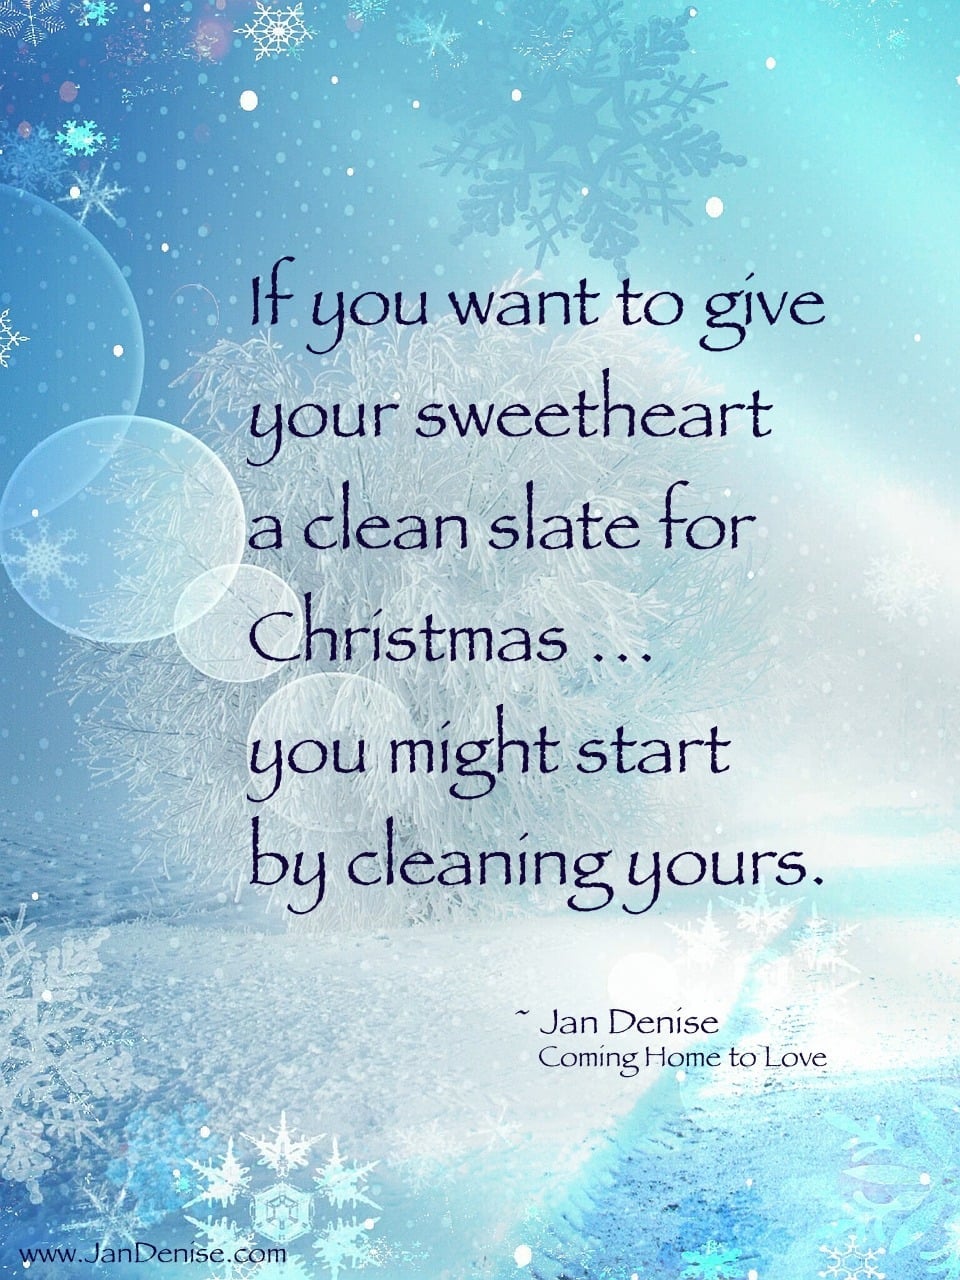 Want a clean slate for Christmas?